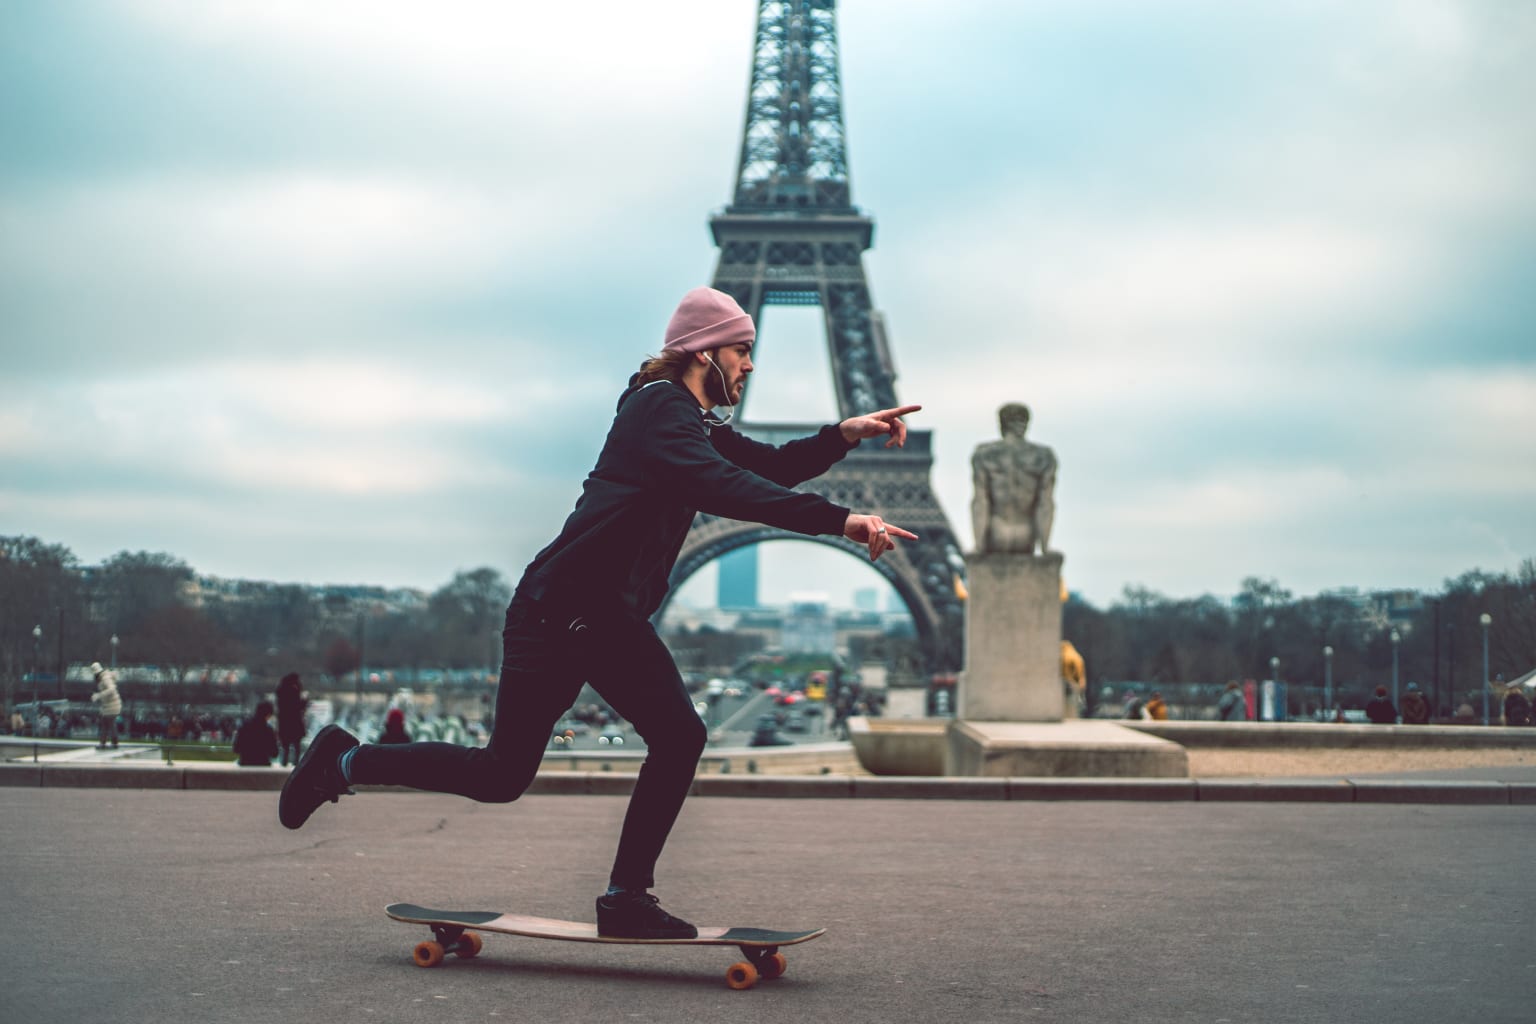 A student skating boarding near the Eiffel Tower.